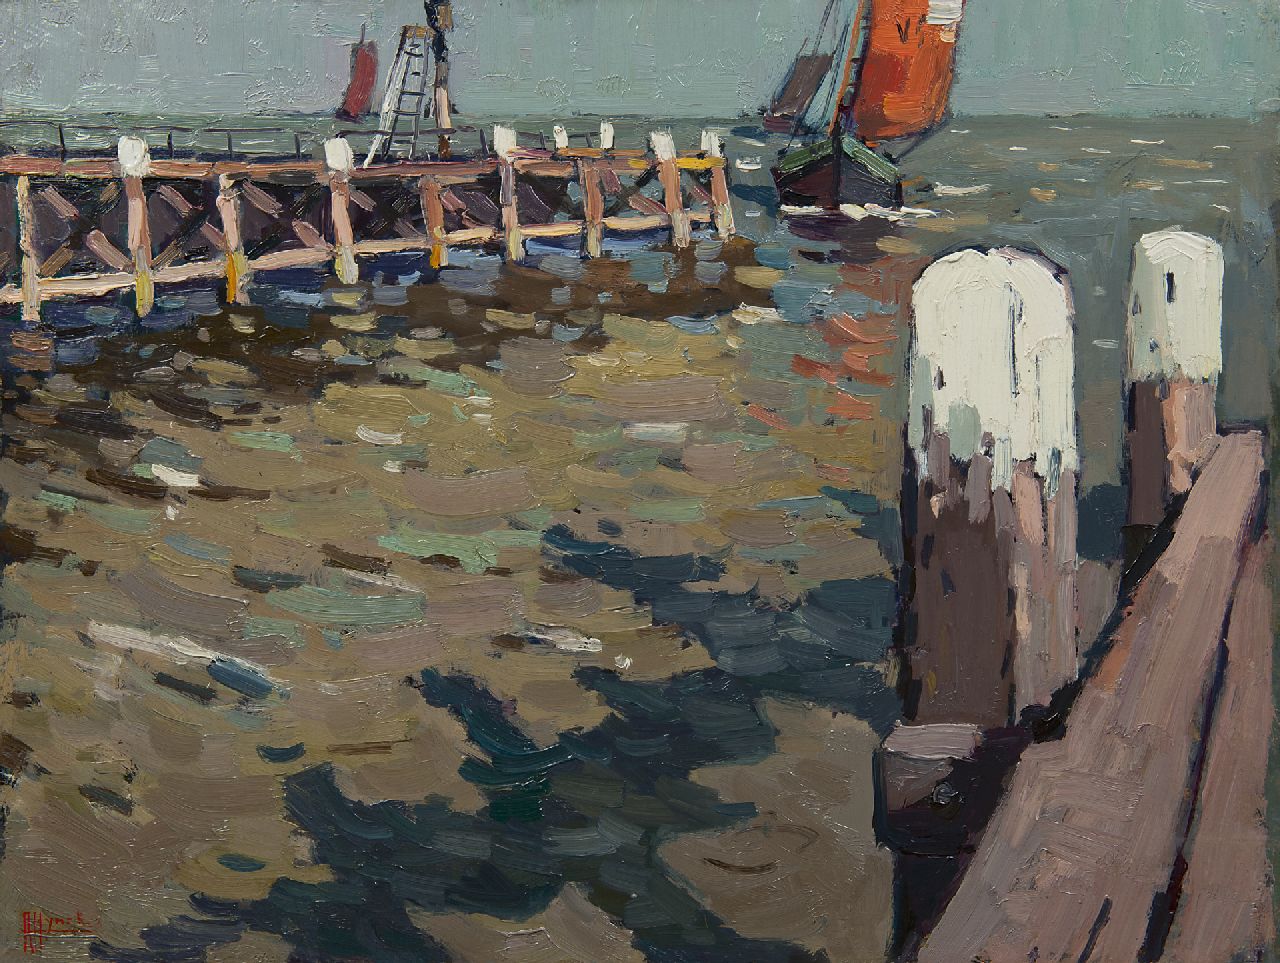 Hynckes R.  | Raoul Hynckes, Entrance of the harbour of Volendam, oil on panel 41.8 x 56.0 cm, signed l.l.